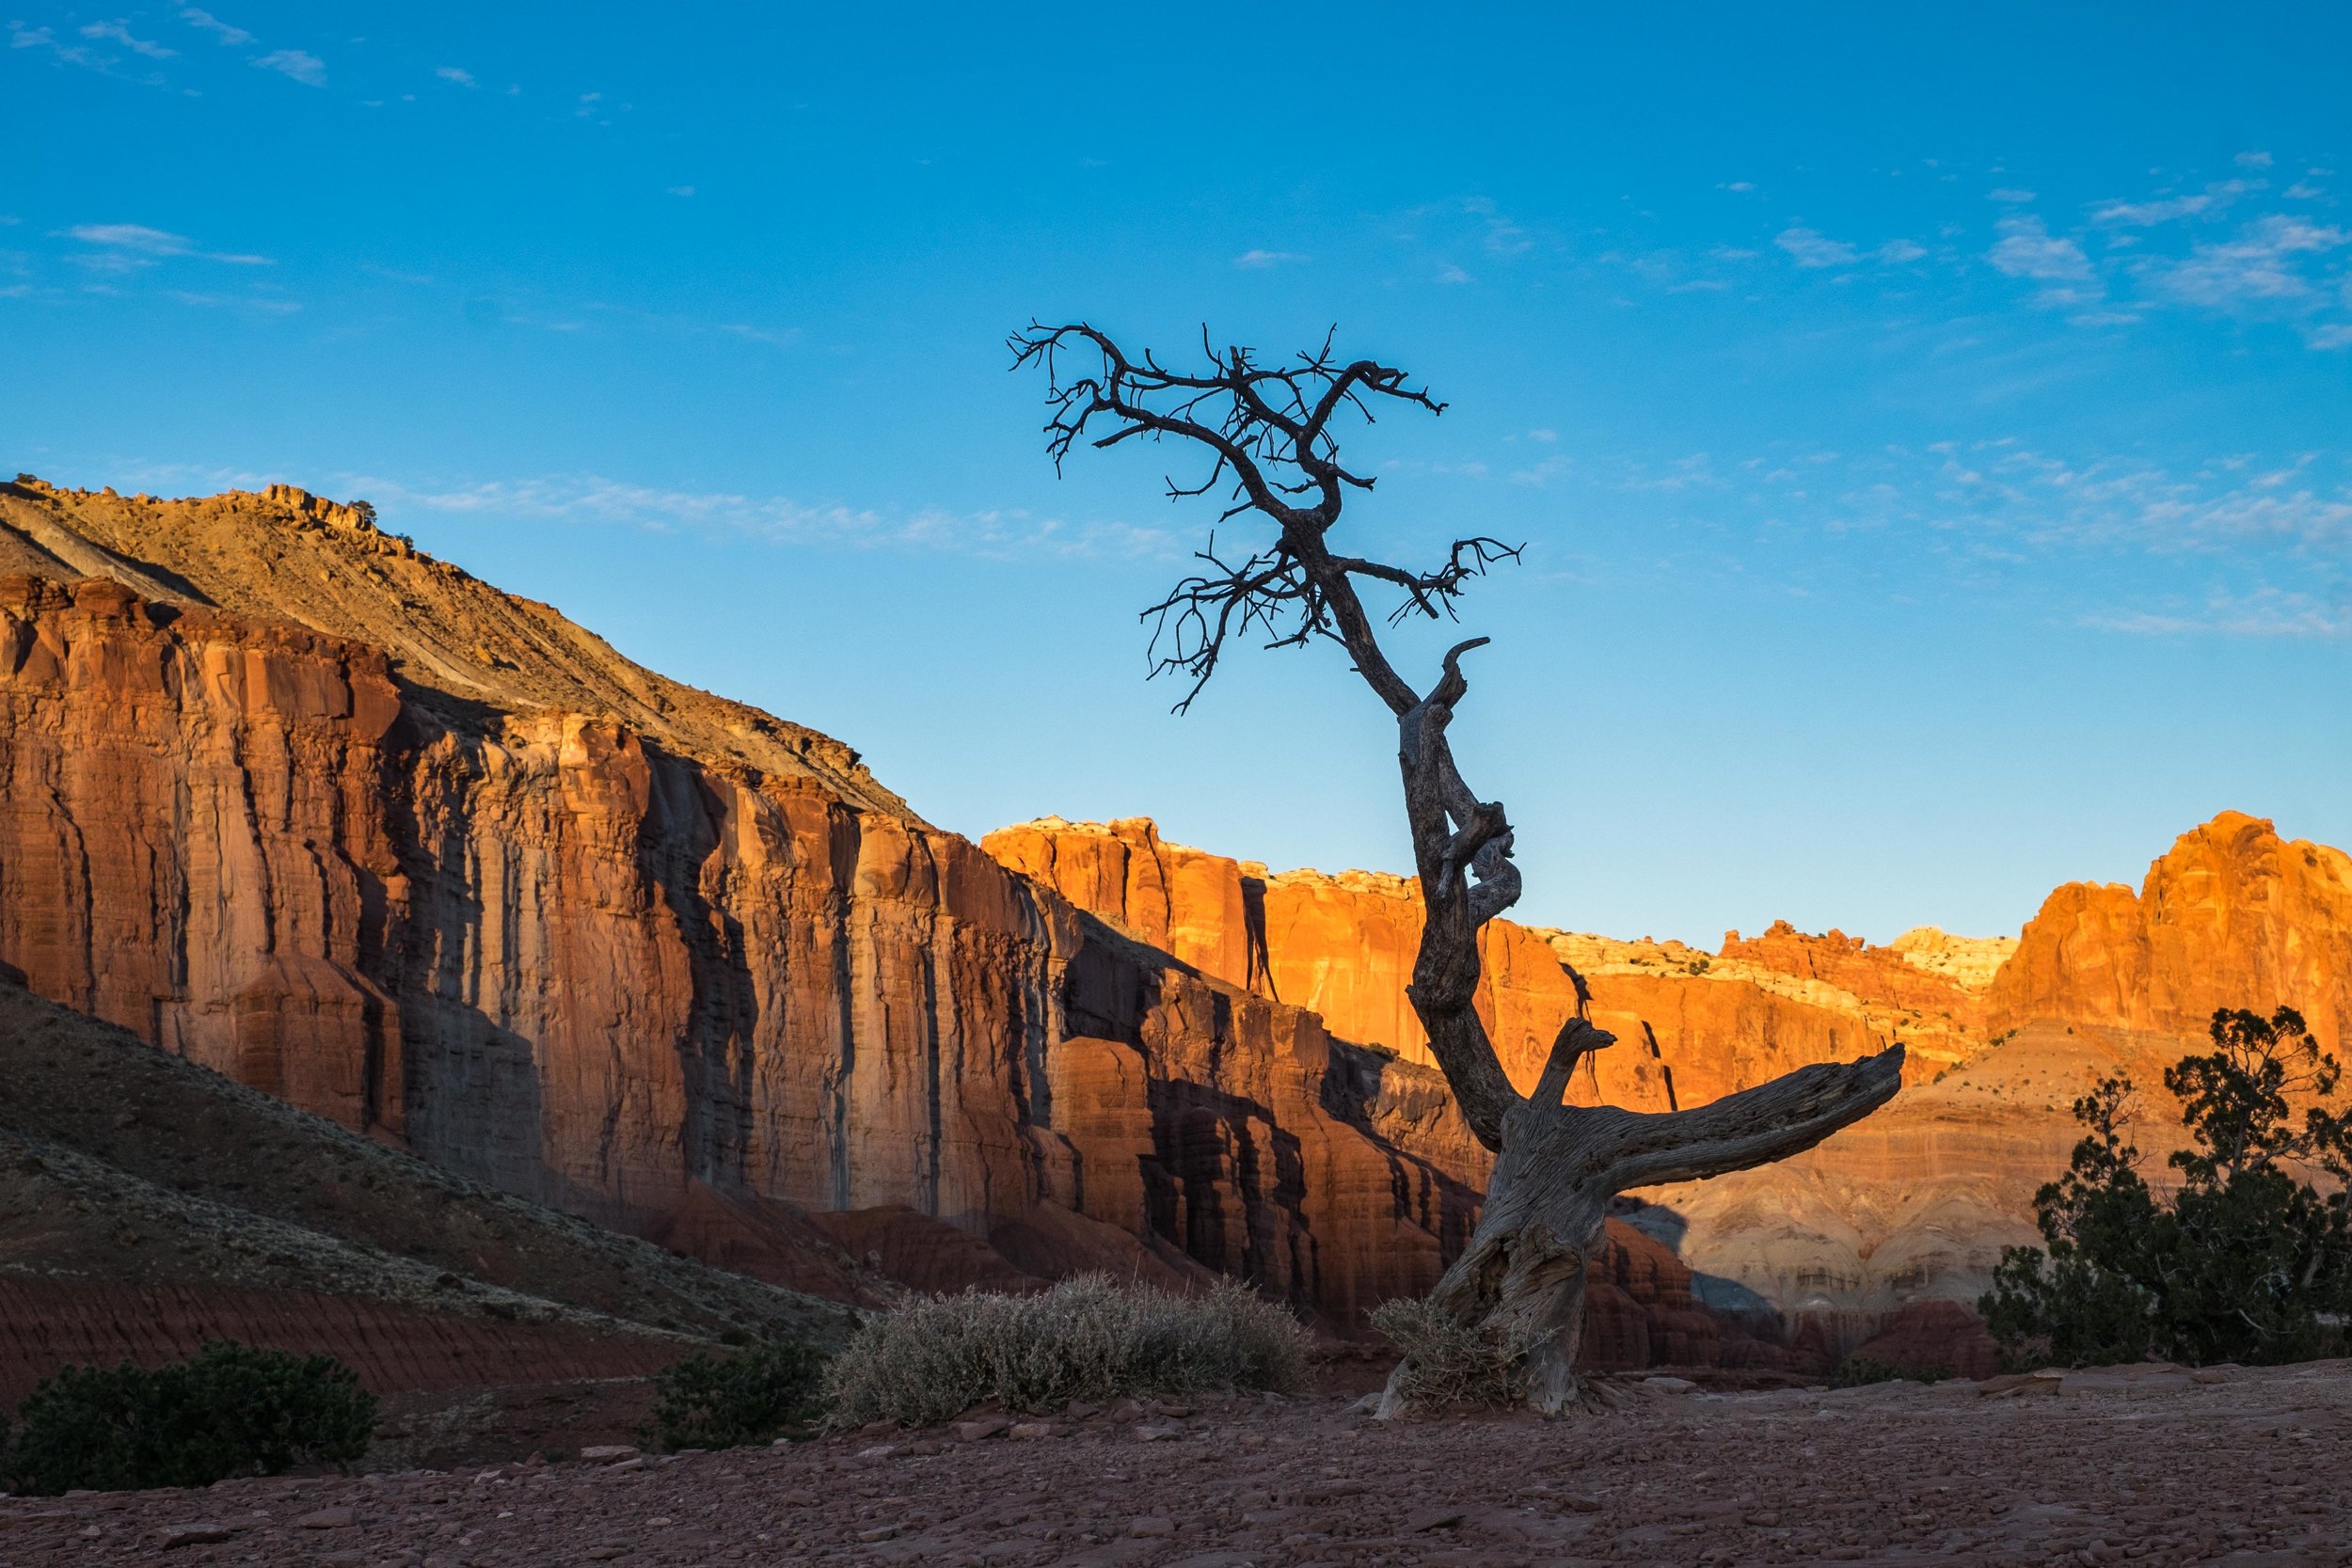 Oost Oprichter Naar boven Capitol Reef National Park — The Greatest American Road Trip